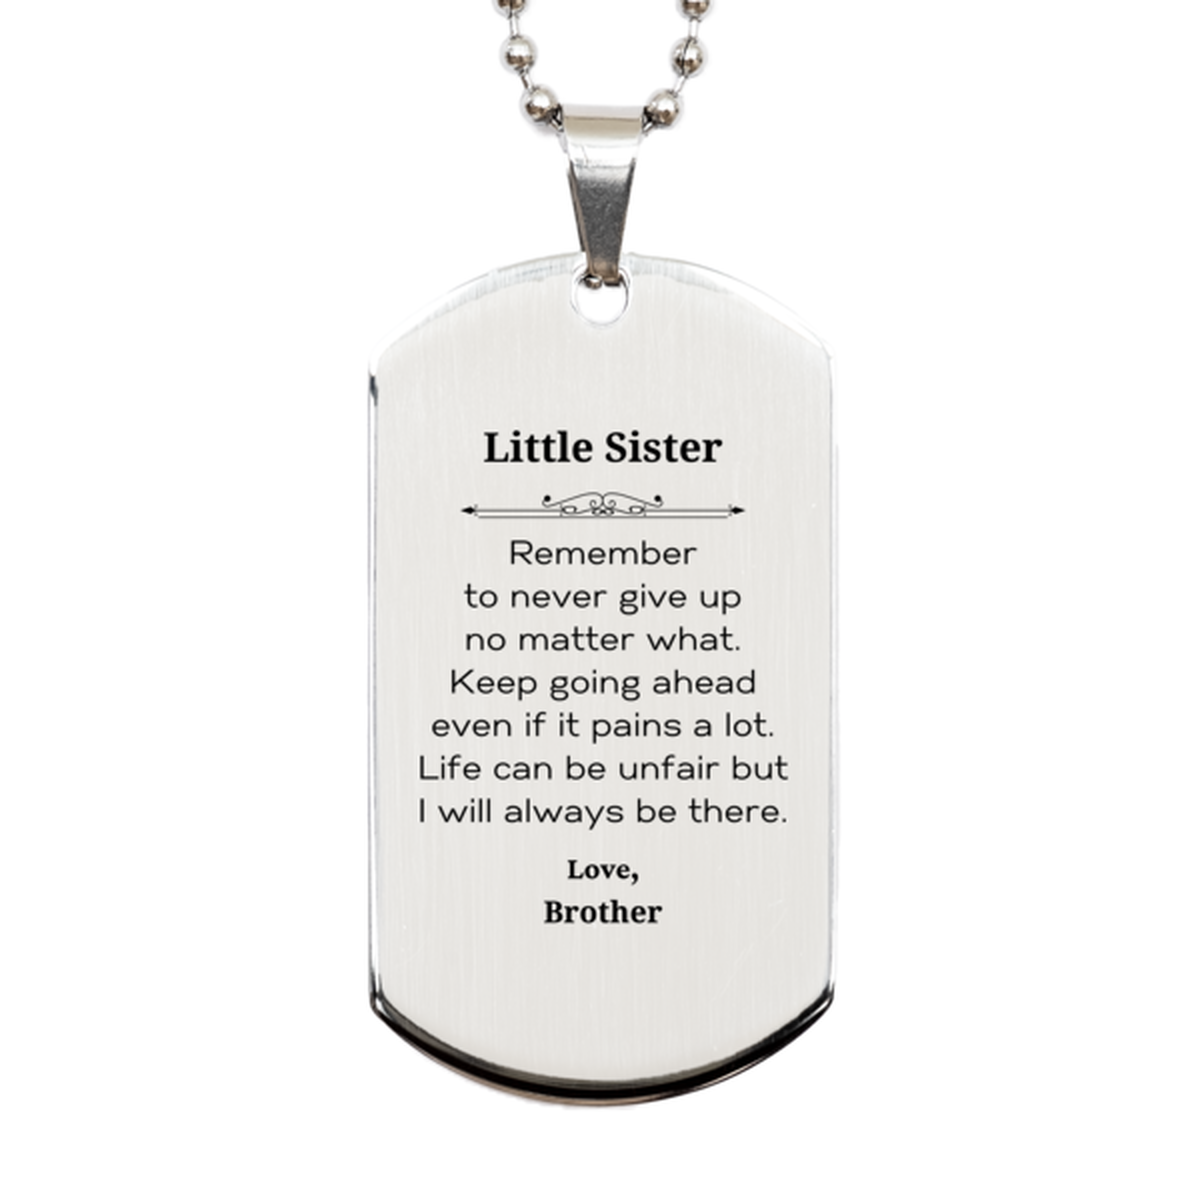 Little Sister Motivational Gifts from Brother, Remember to never give up no matter what, Inspirational Birthday Silver Dog Tag for Little Sister